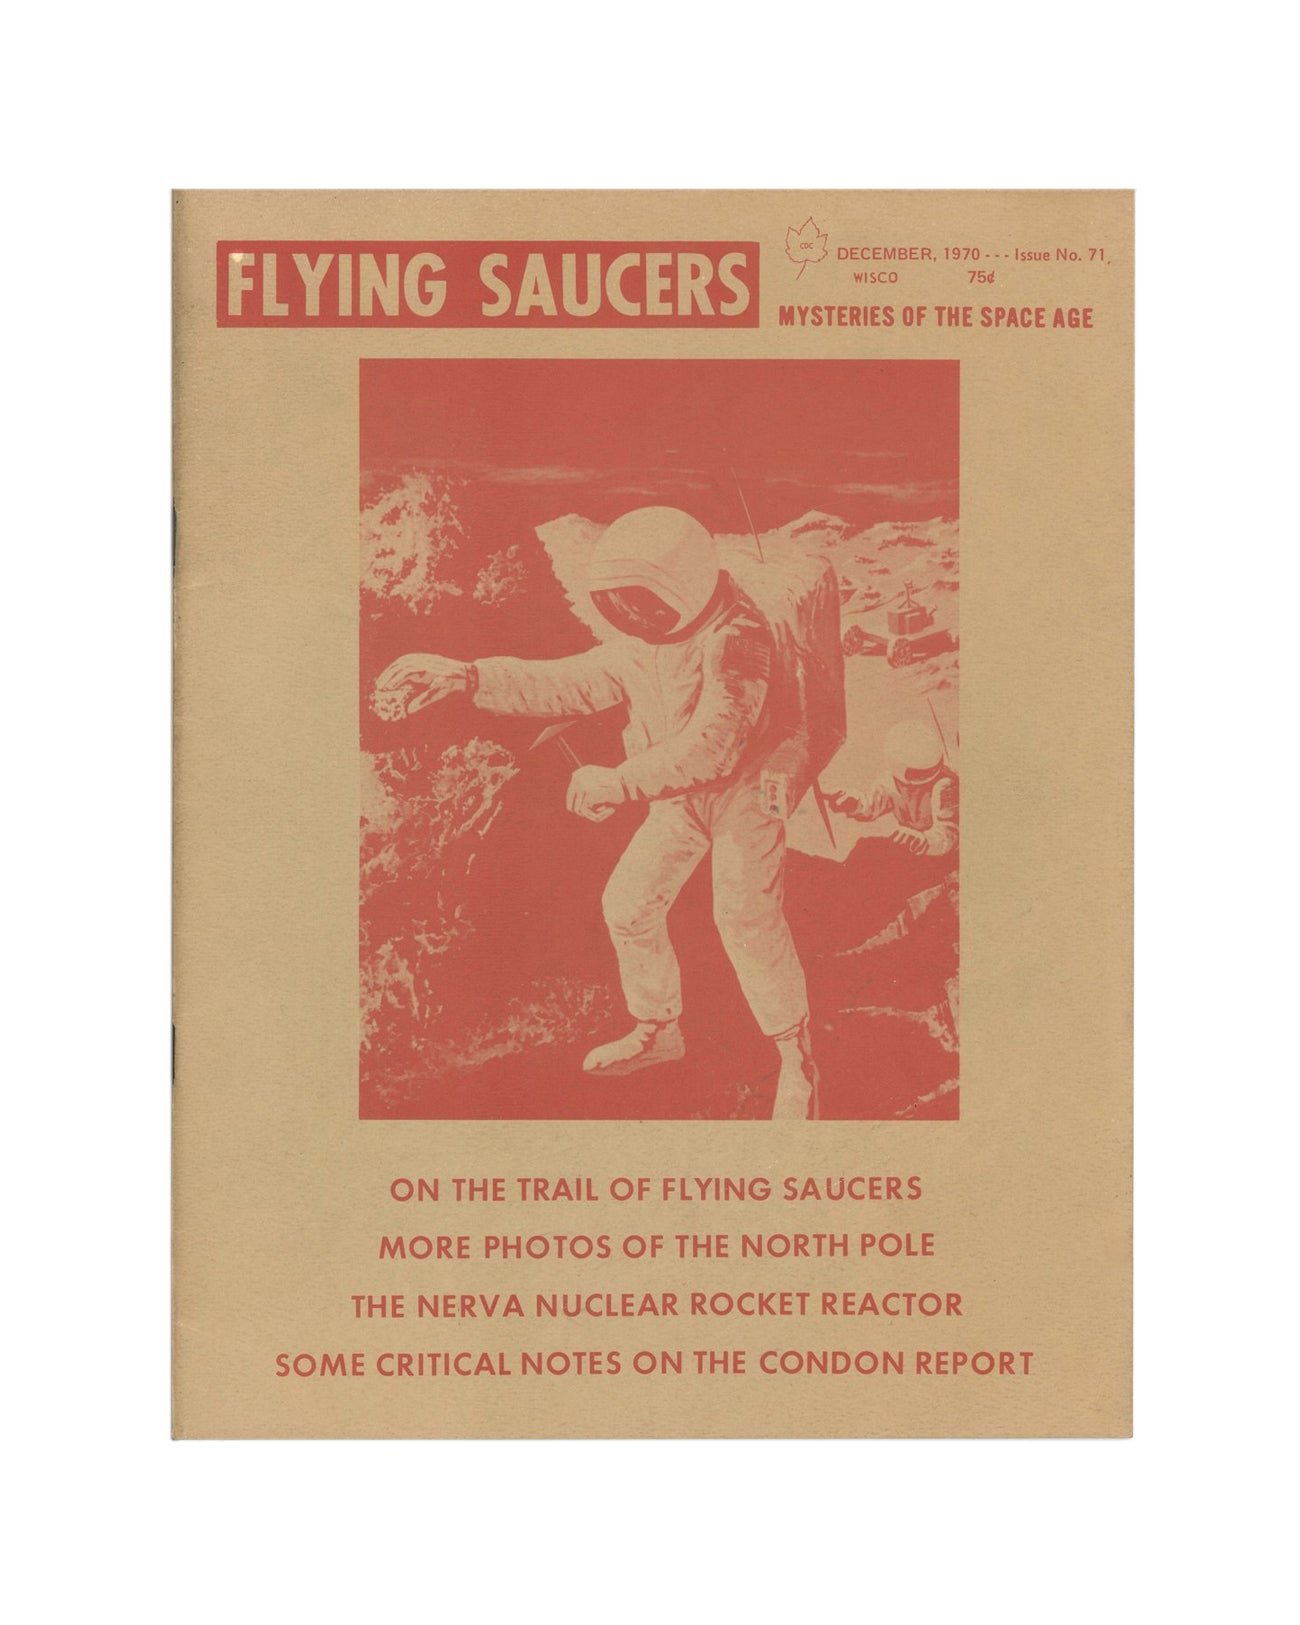 Vintage Flying Saucers Issue No. 71: Mysteries of the Space Age